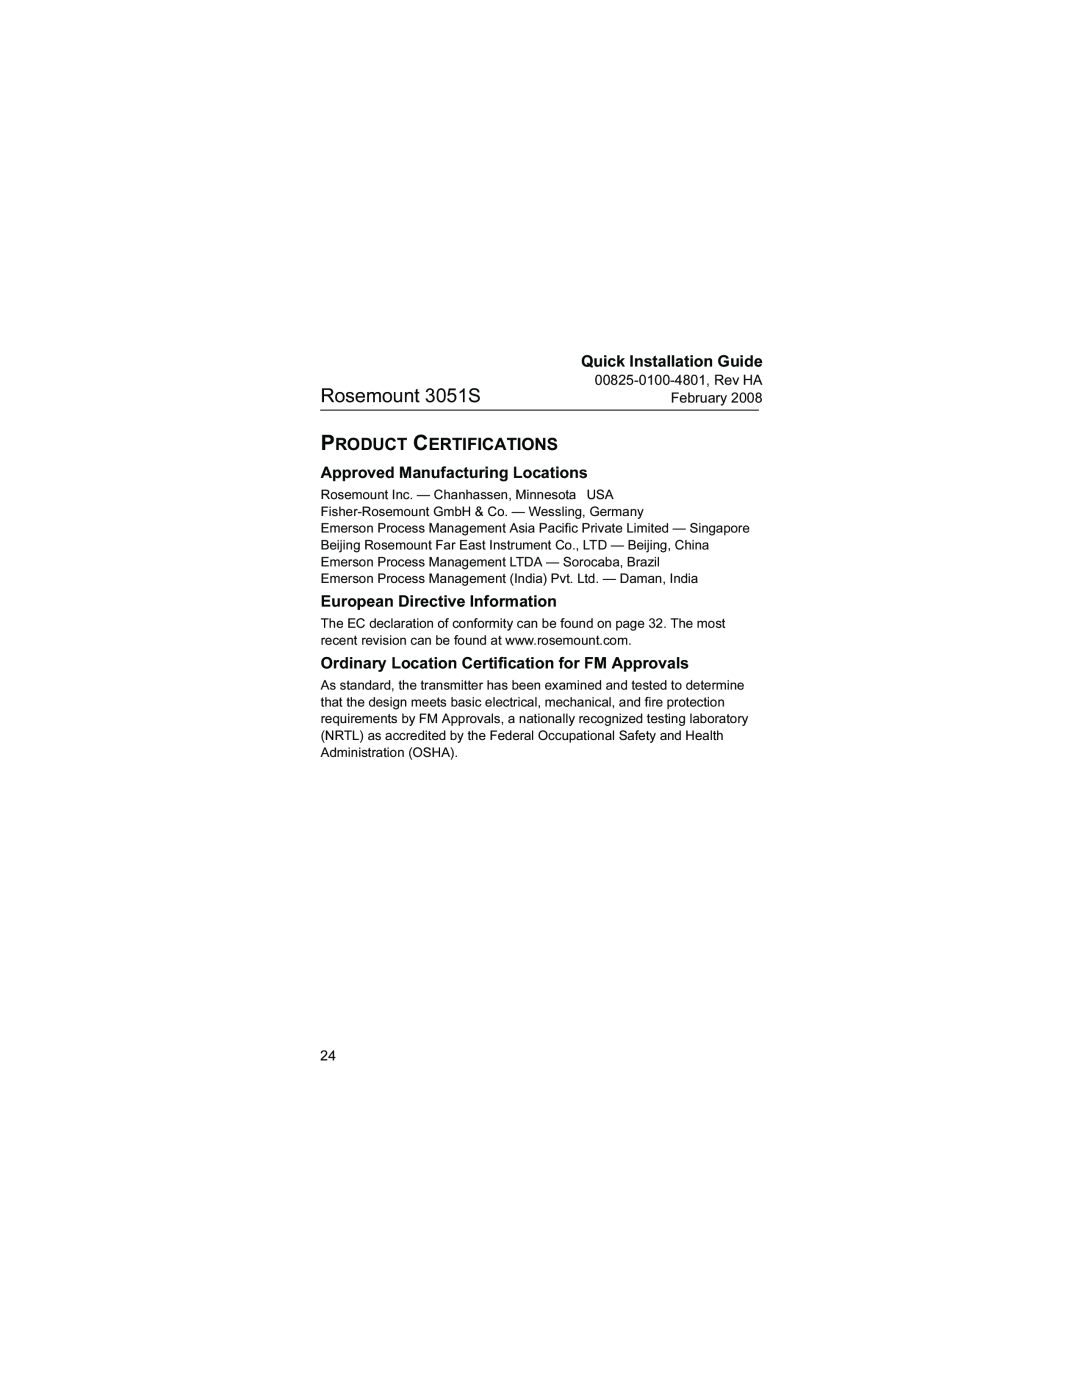 Emerson manual Product Certifications, Approved Manufacturing Locations, European Directive Information, Rosemount 3051S 